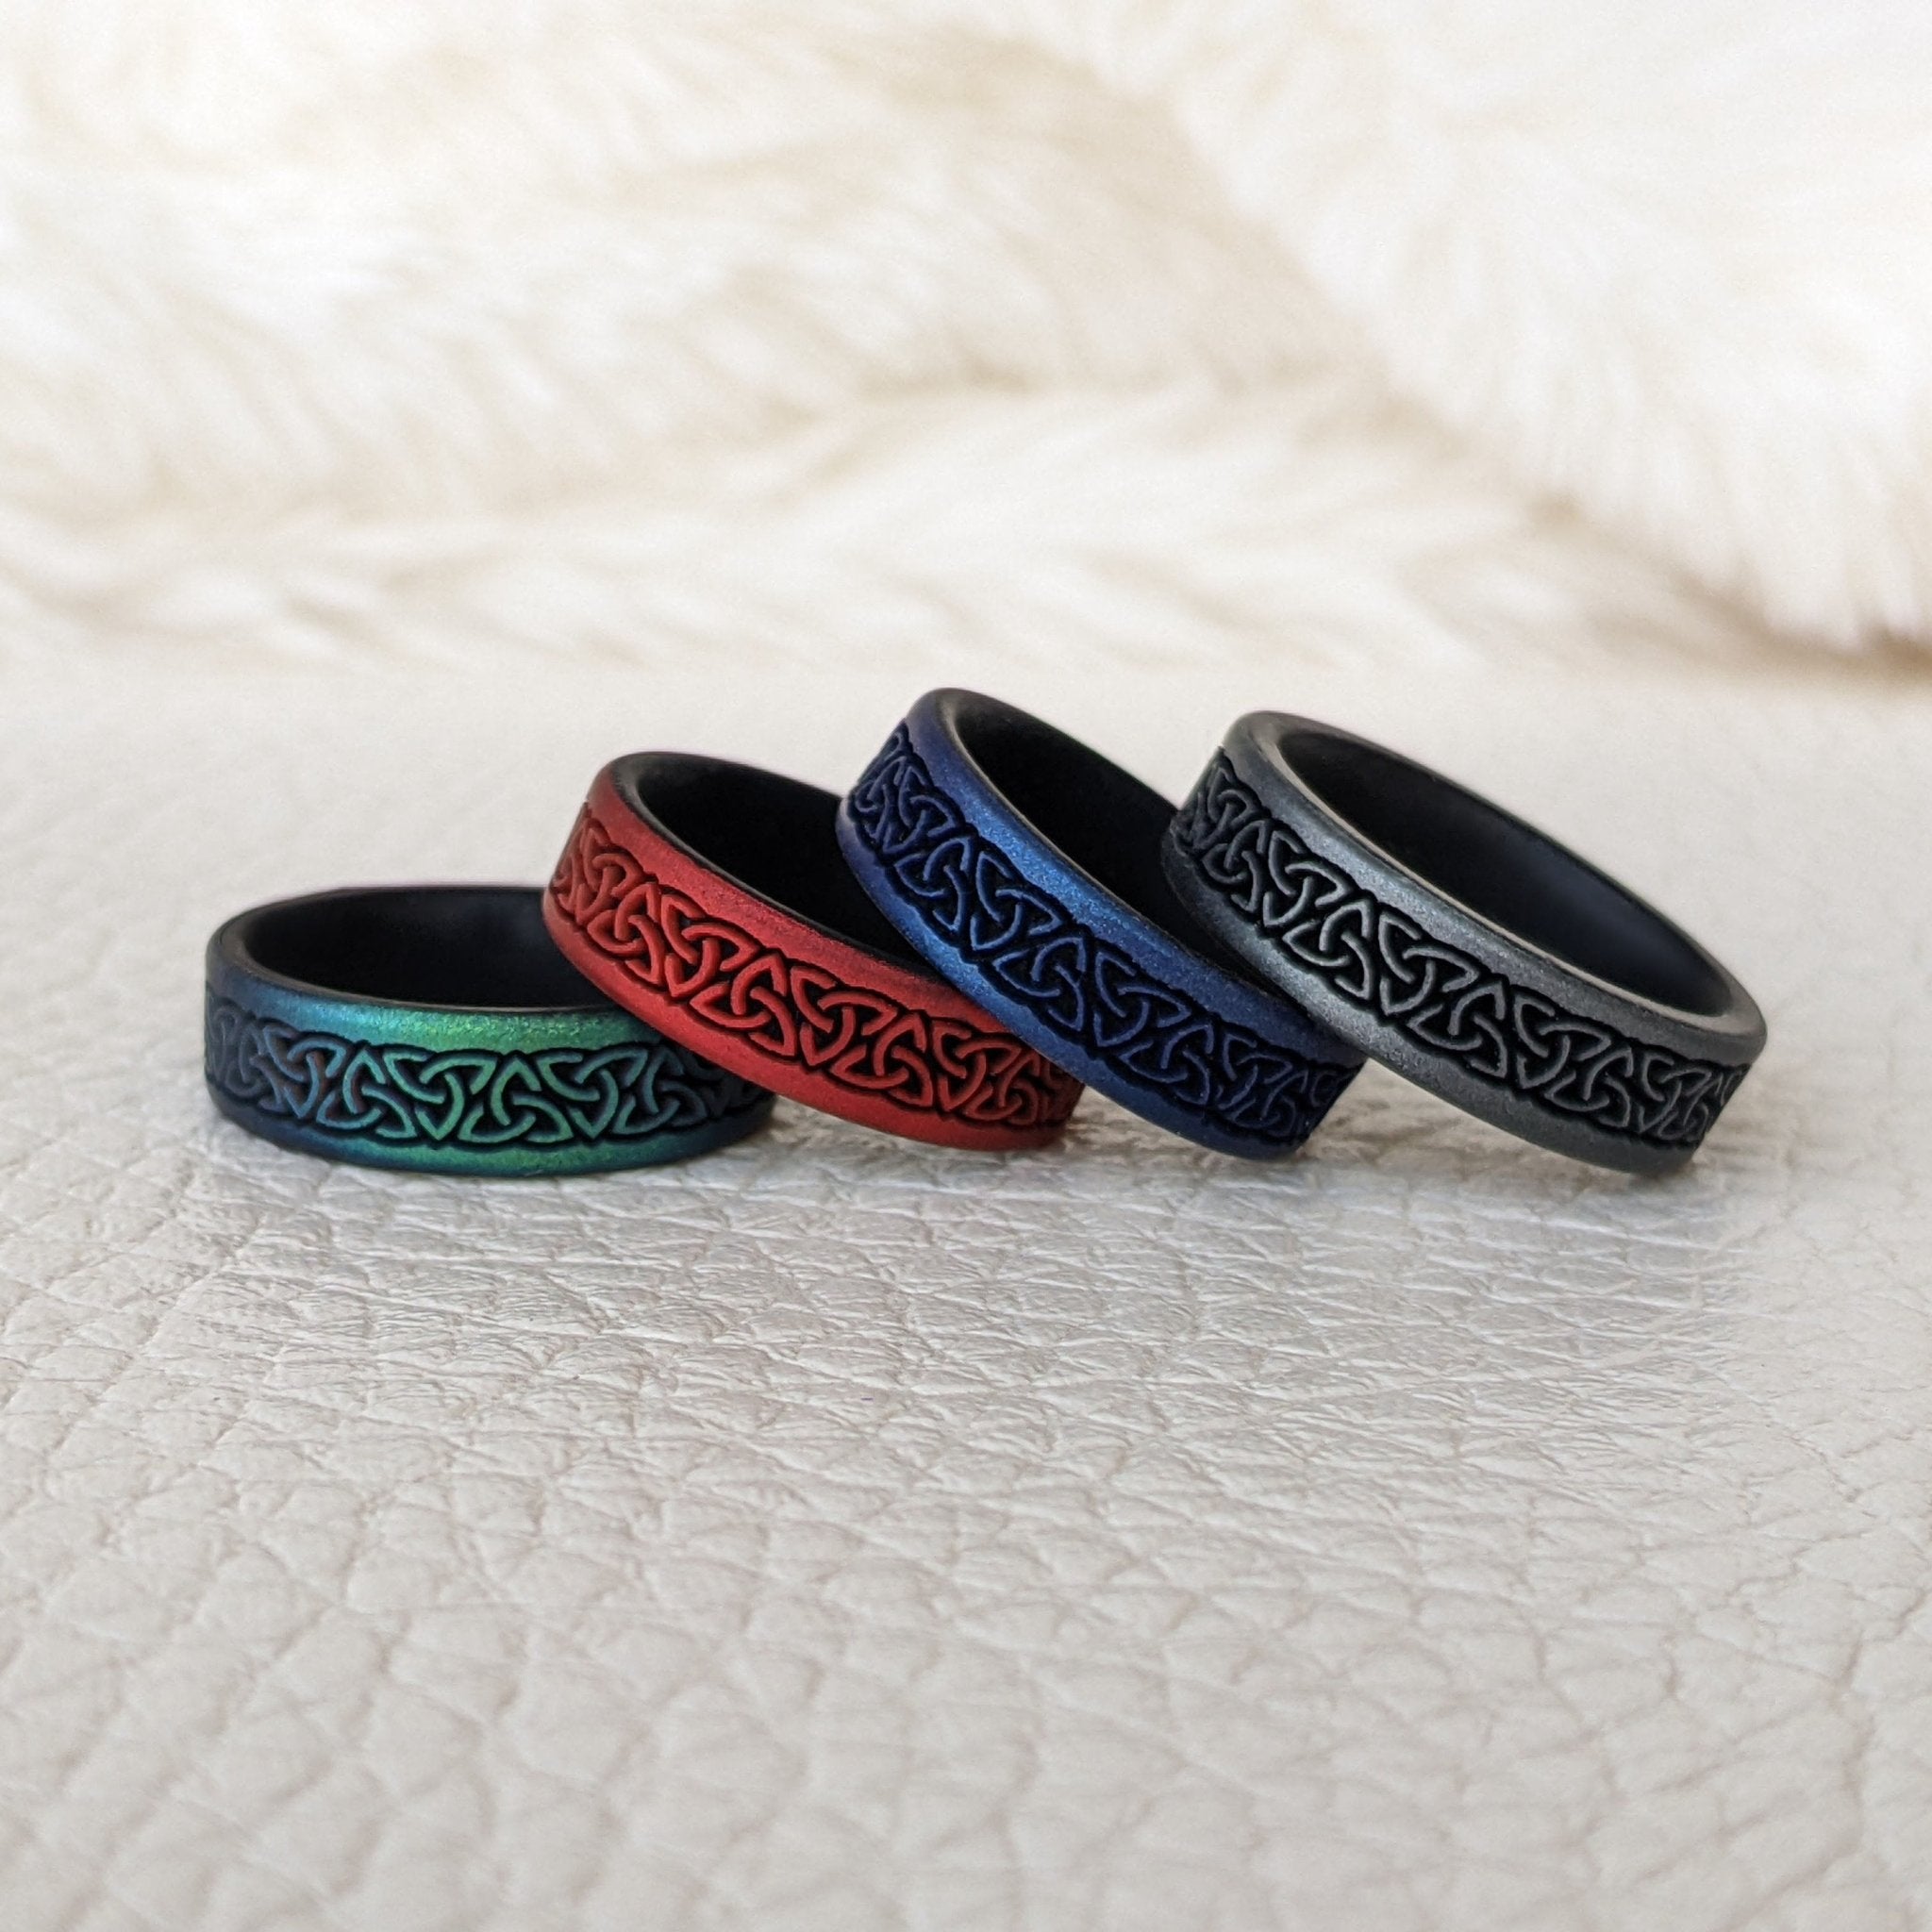 Trinity Band Silicone Ring - Engraved Dual Layer - Knot Theory